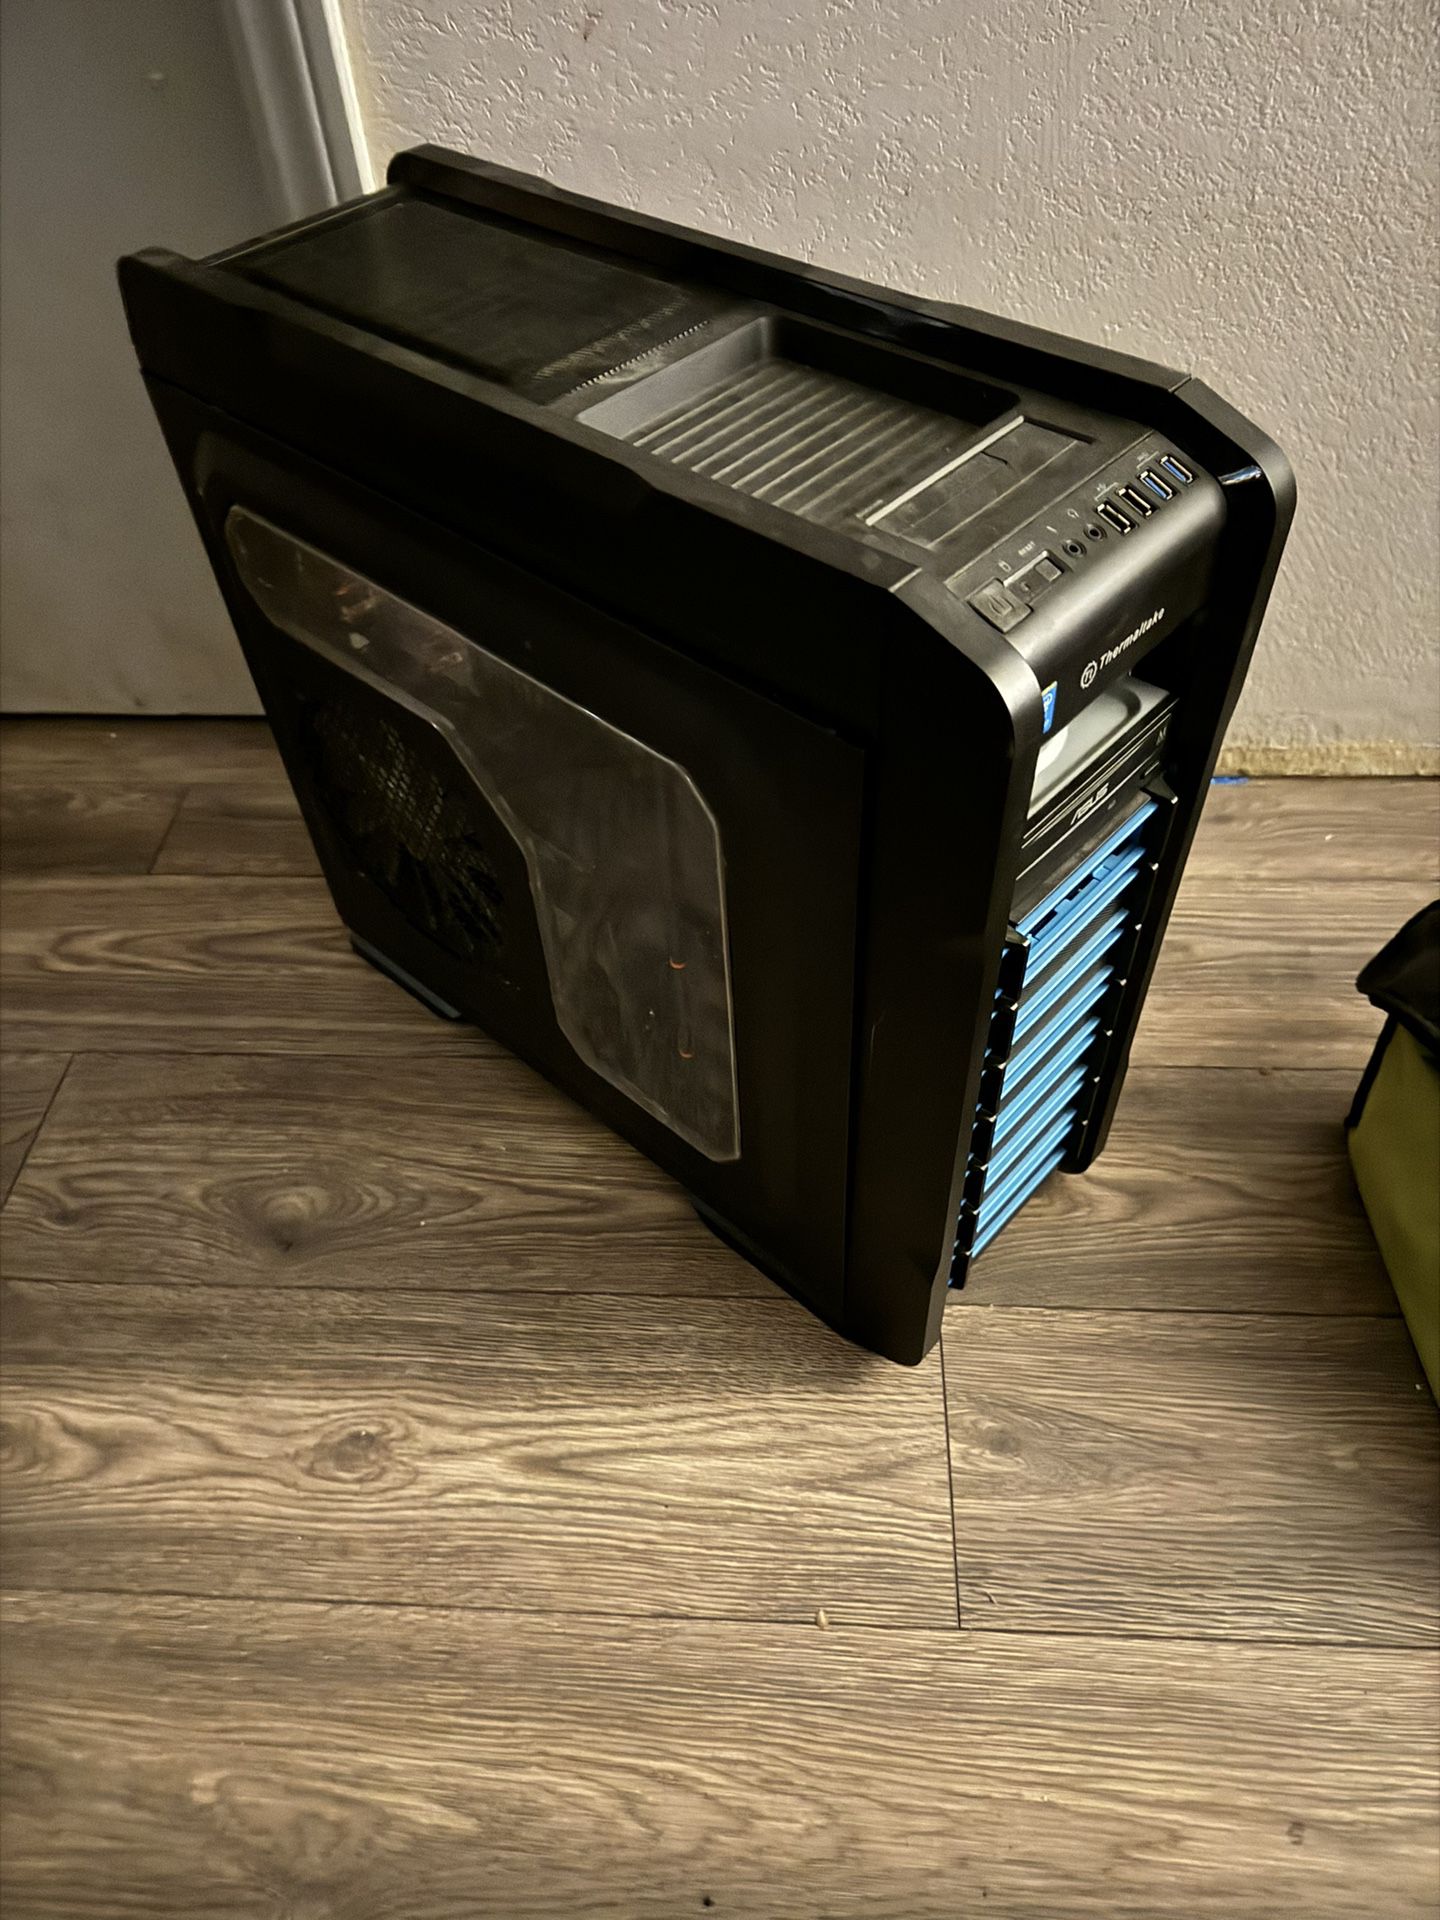 Thermaltake - Chaser A31